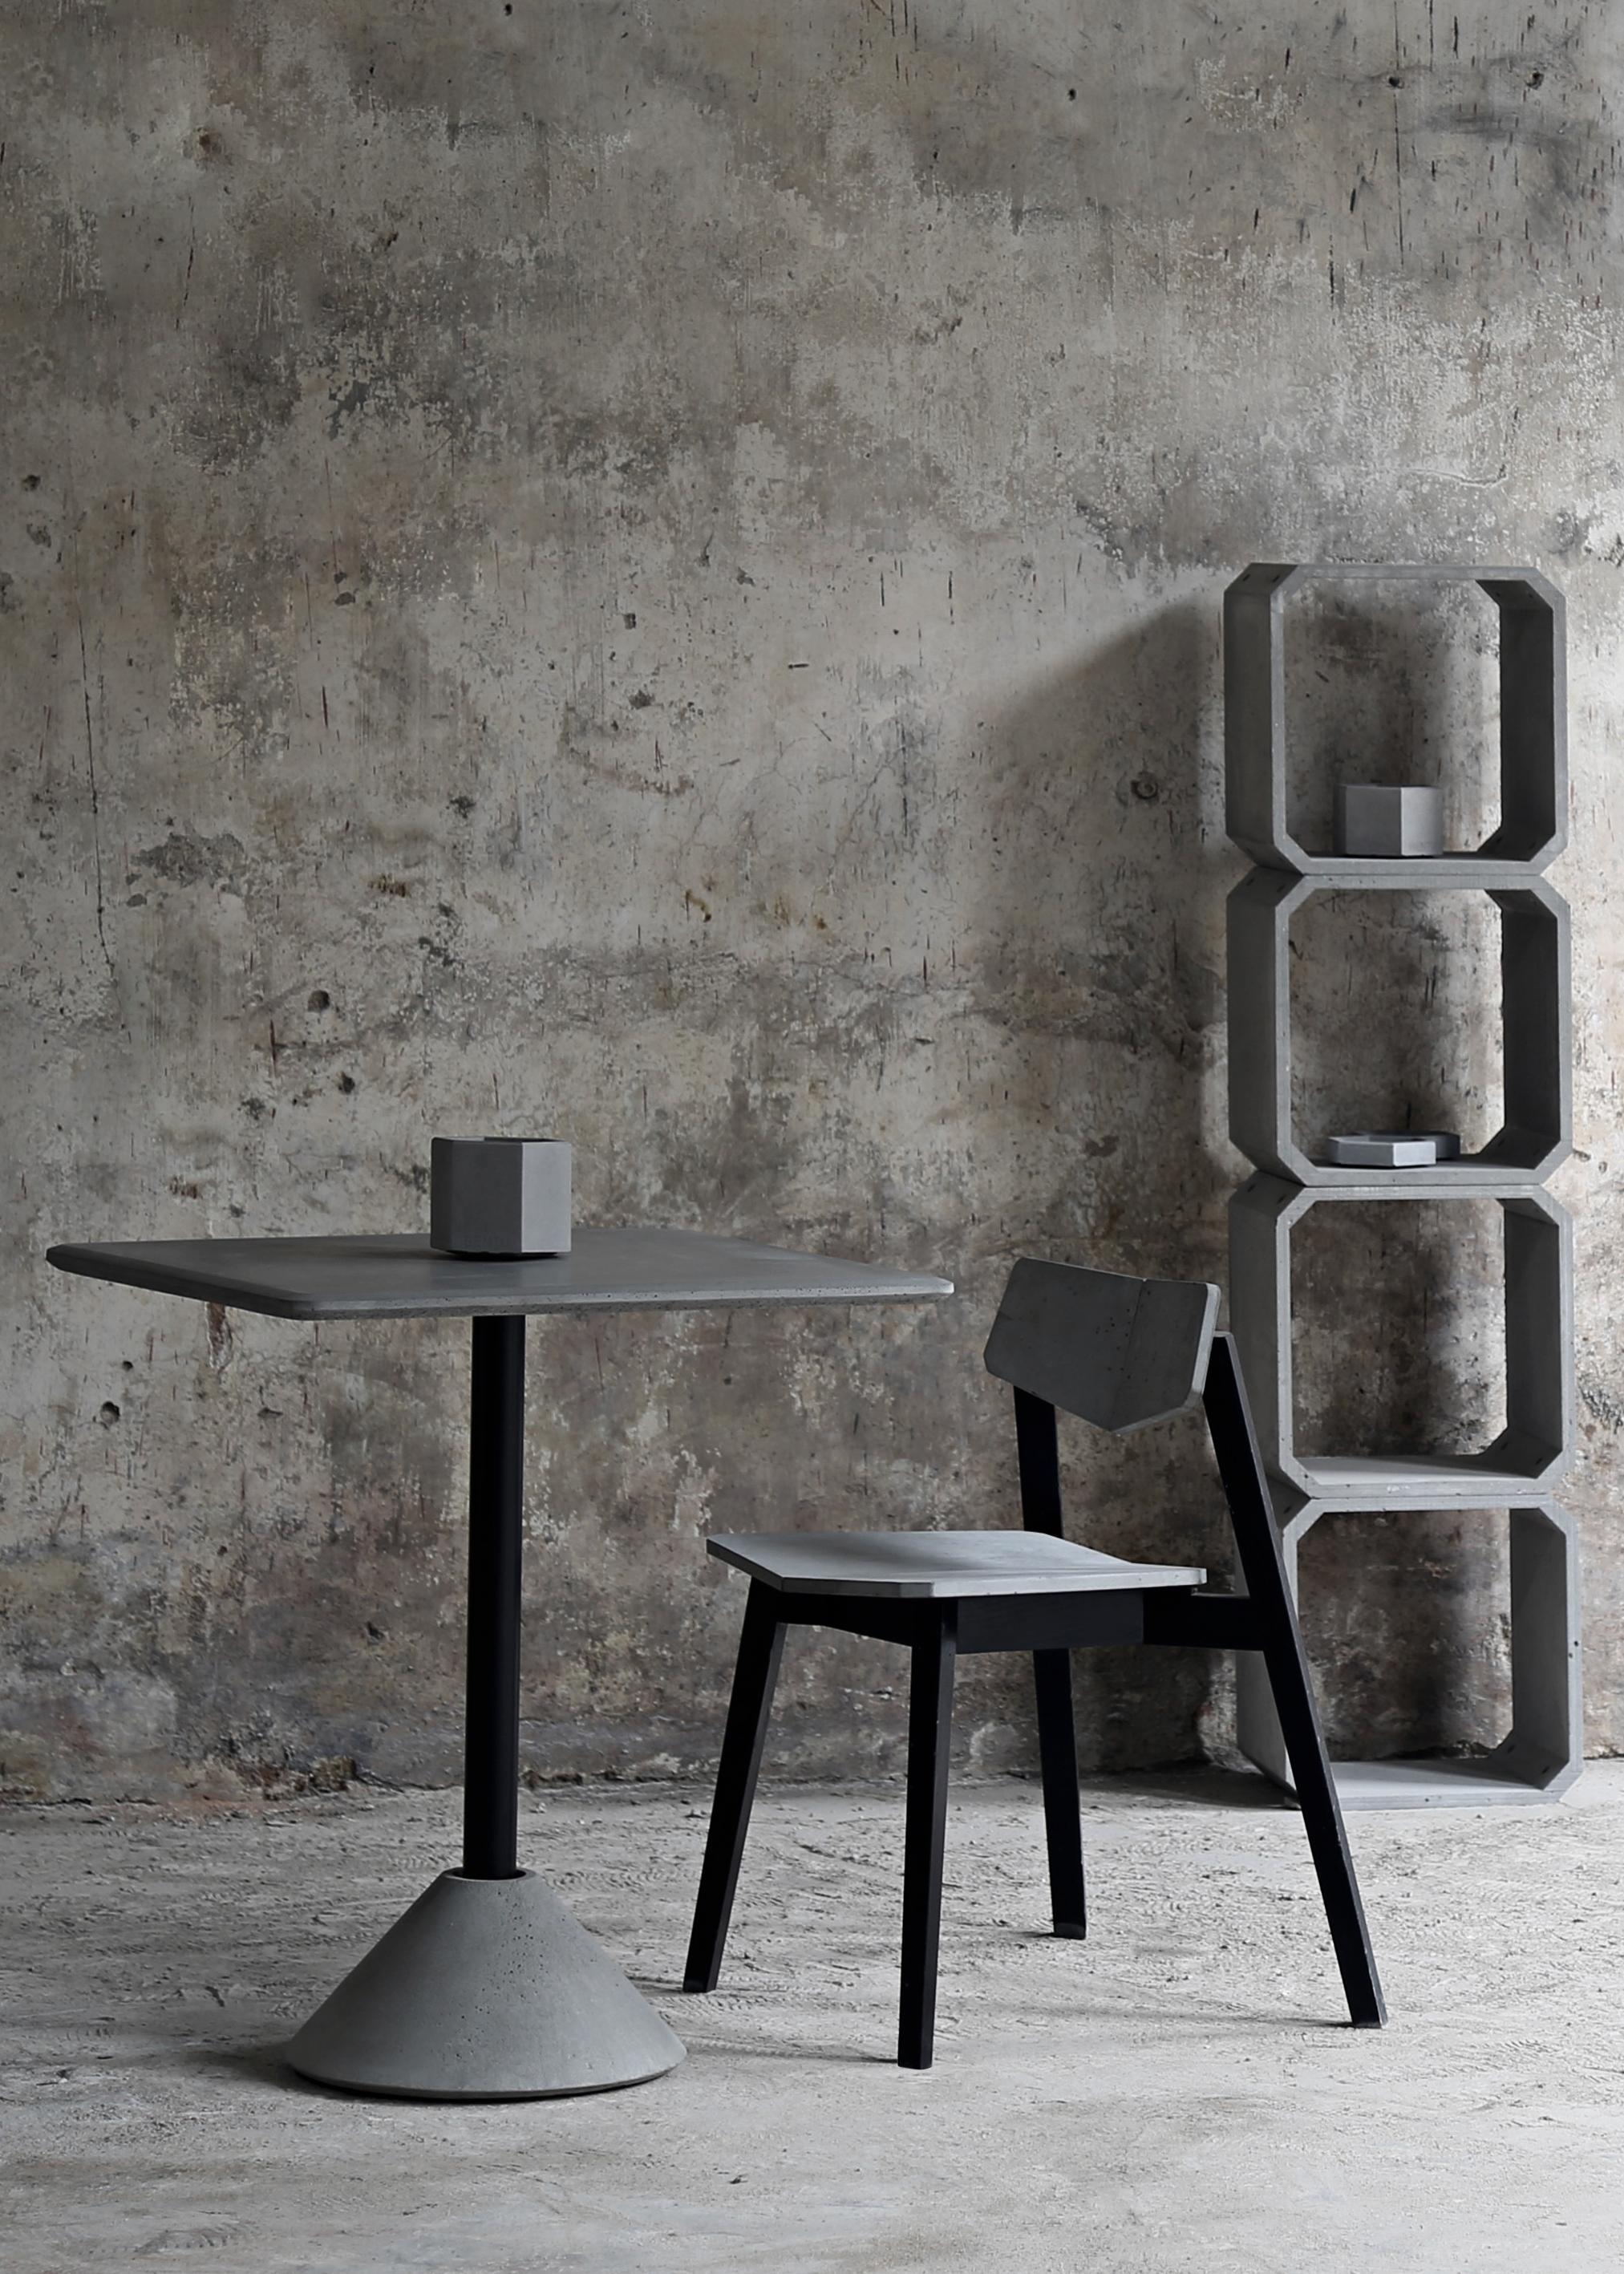 Chinese Concrete and Powder Coated Steel Chair, “H, ” from Concrete Collection by Bentu